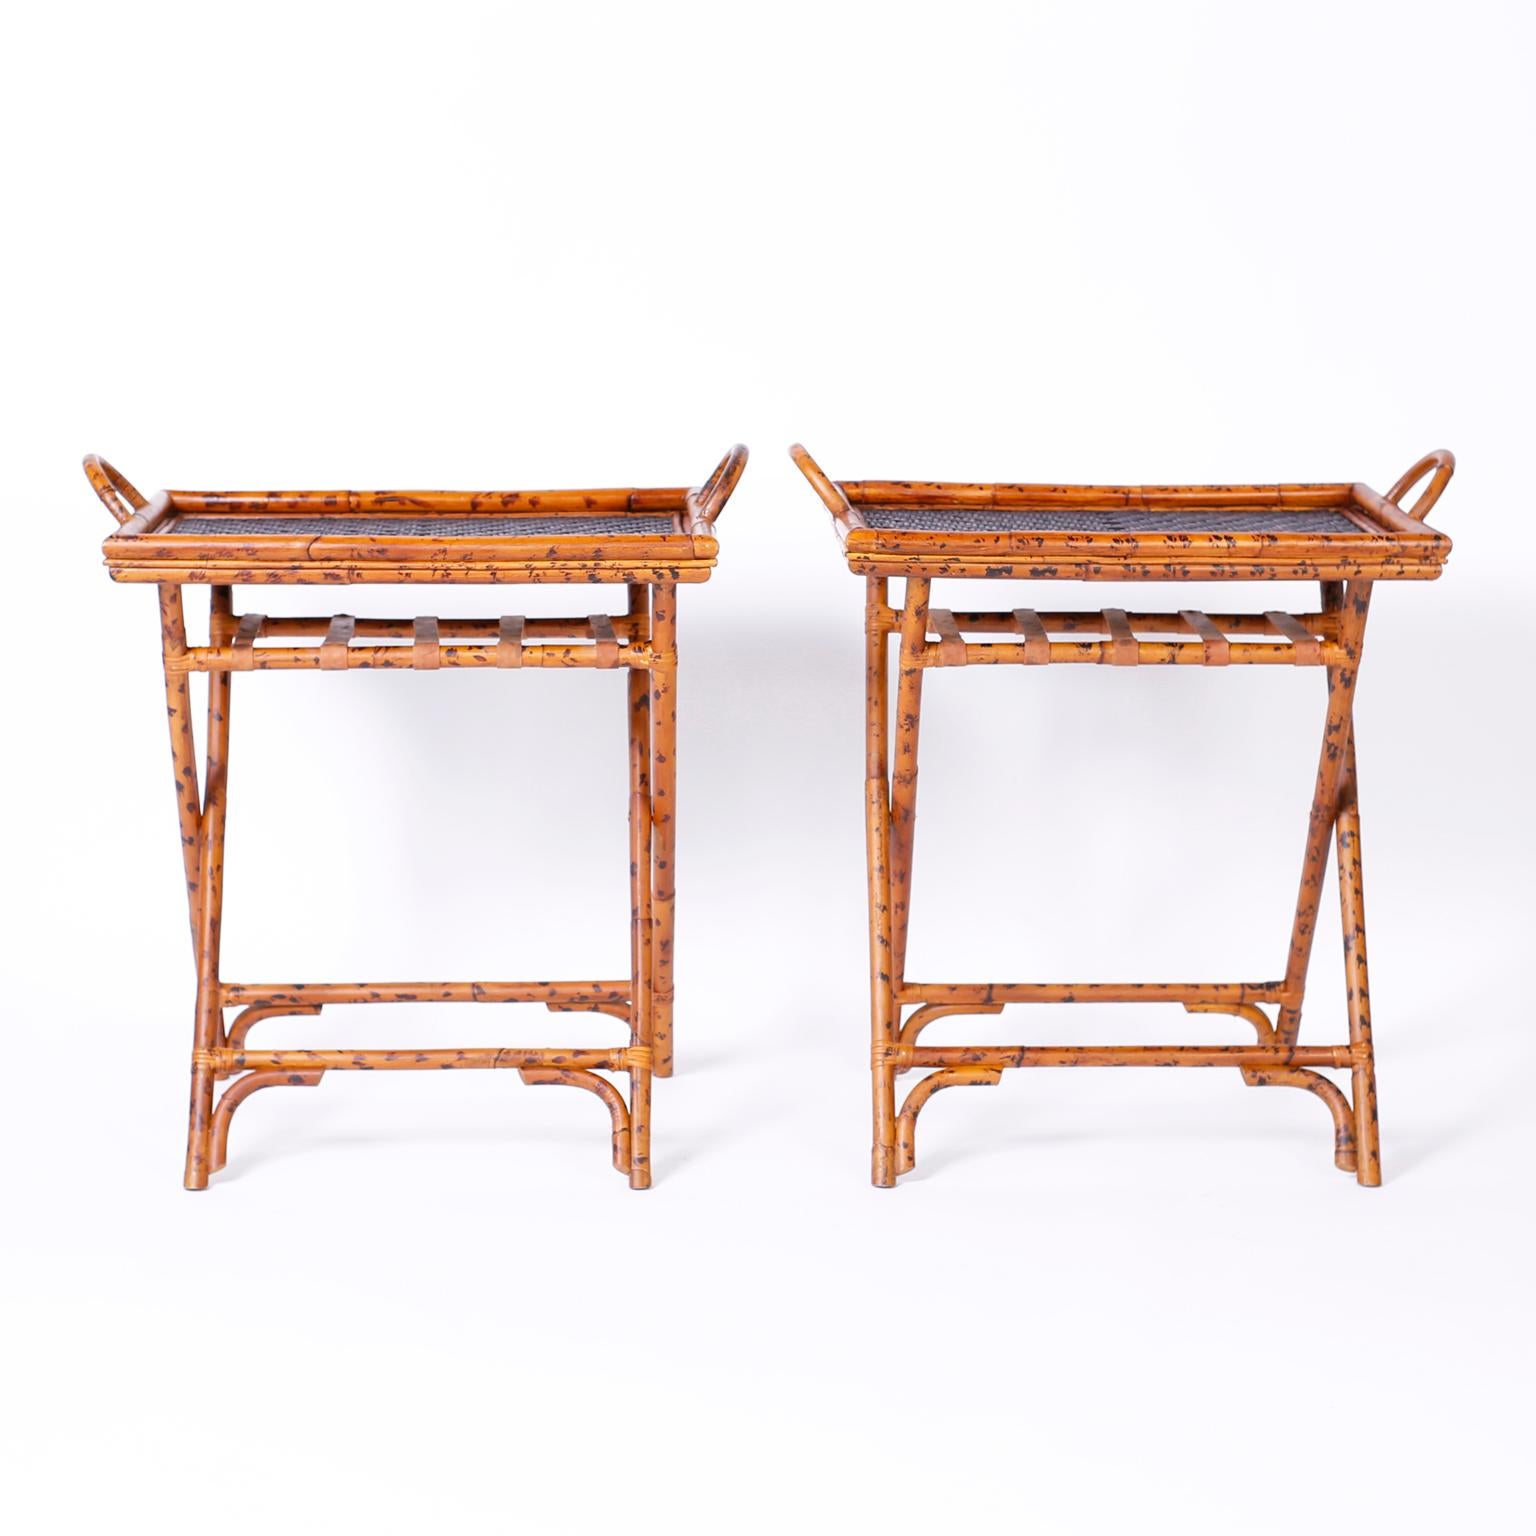 Multi purpose pair of midcentury British colonial tray tables crafted in burnt bamboo with removable herring bone, woven reed or wicker tops, bent bamboo handles and folding X-form bases.